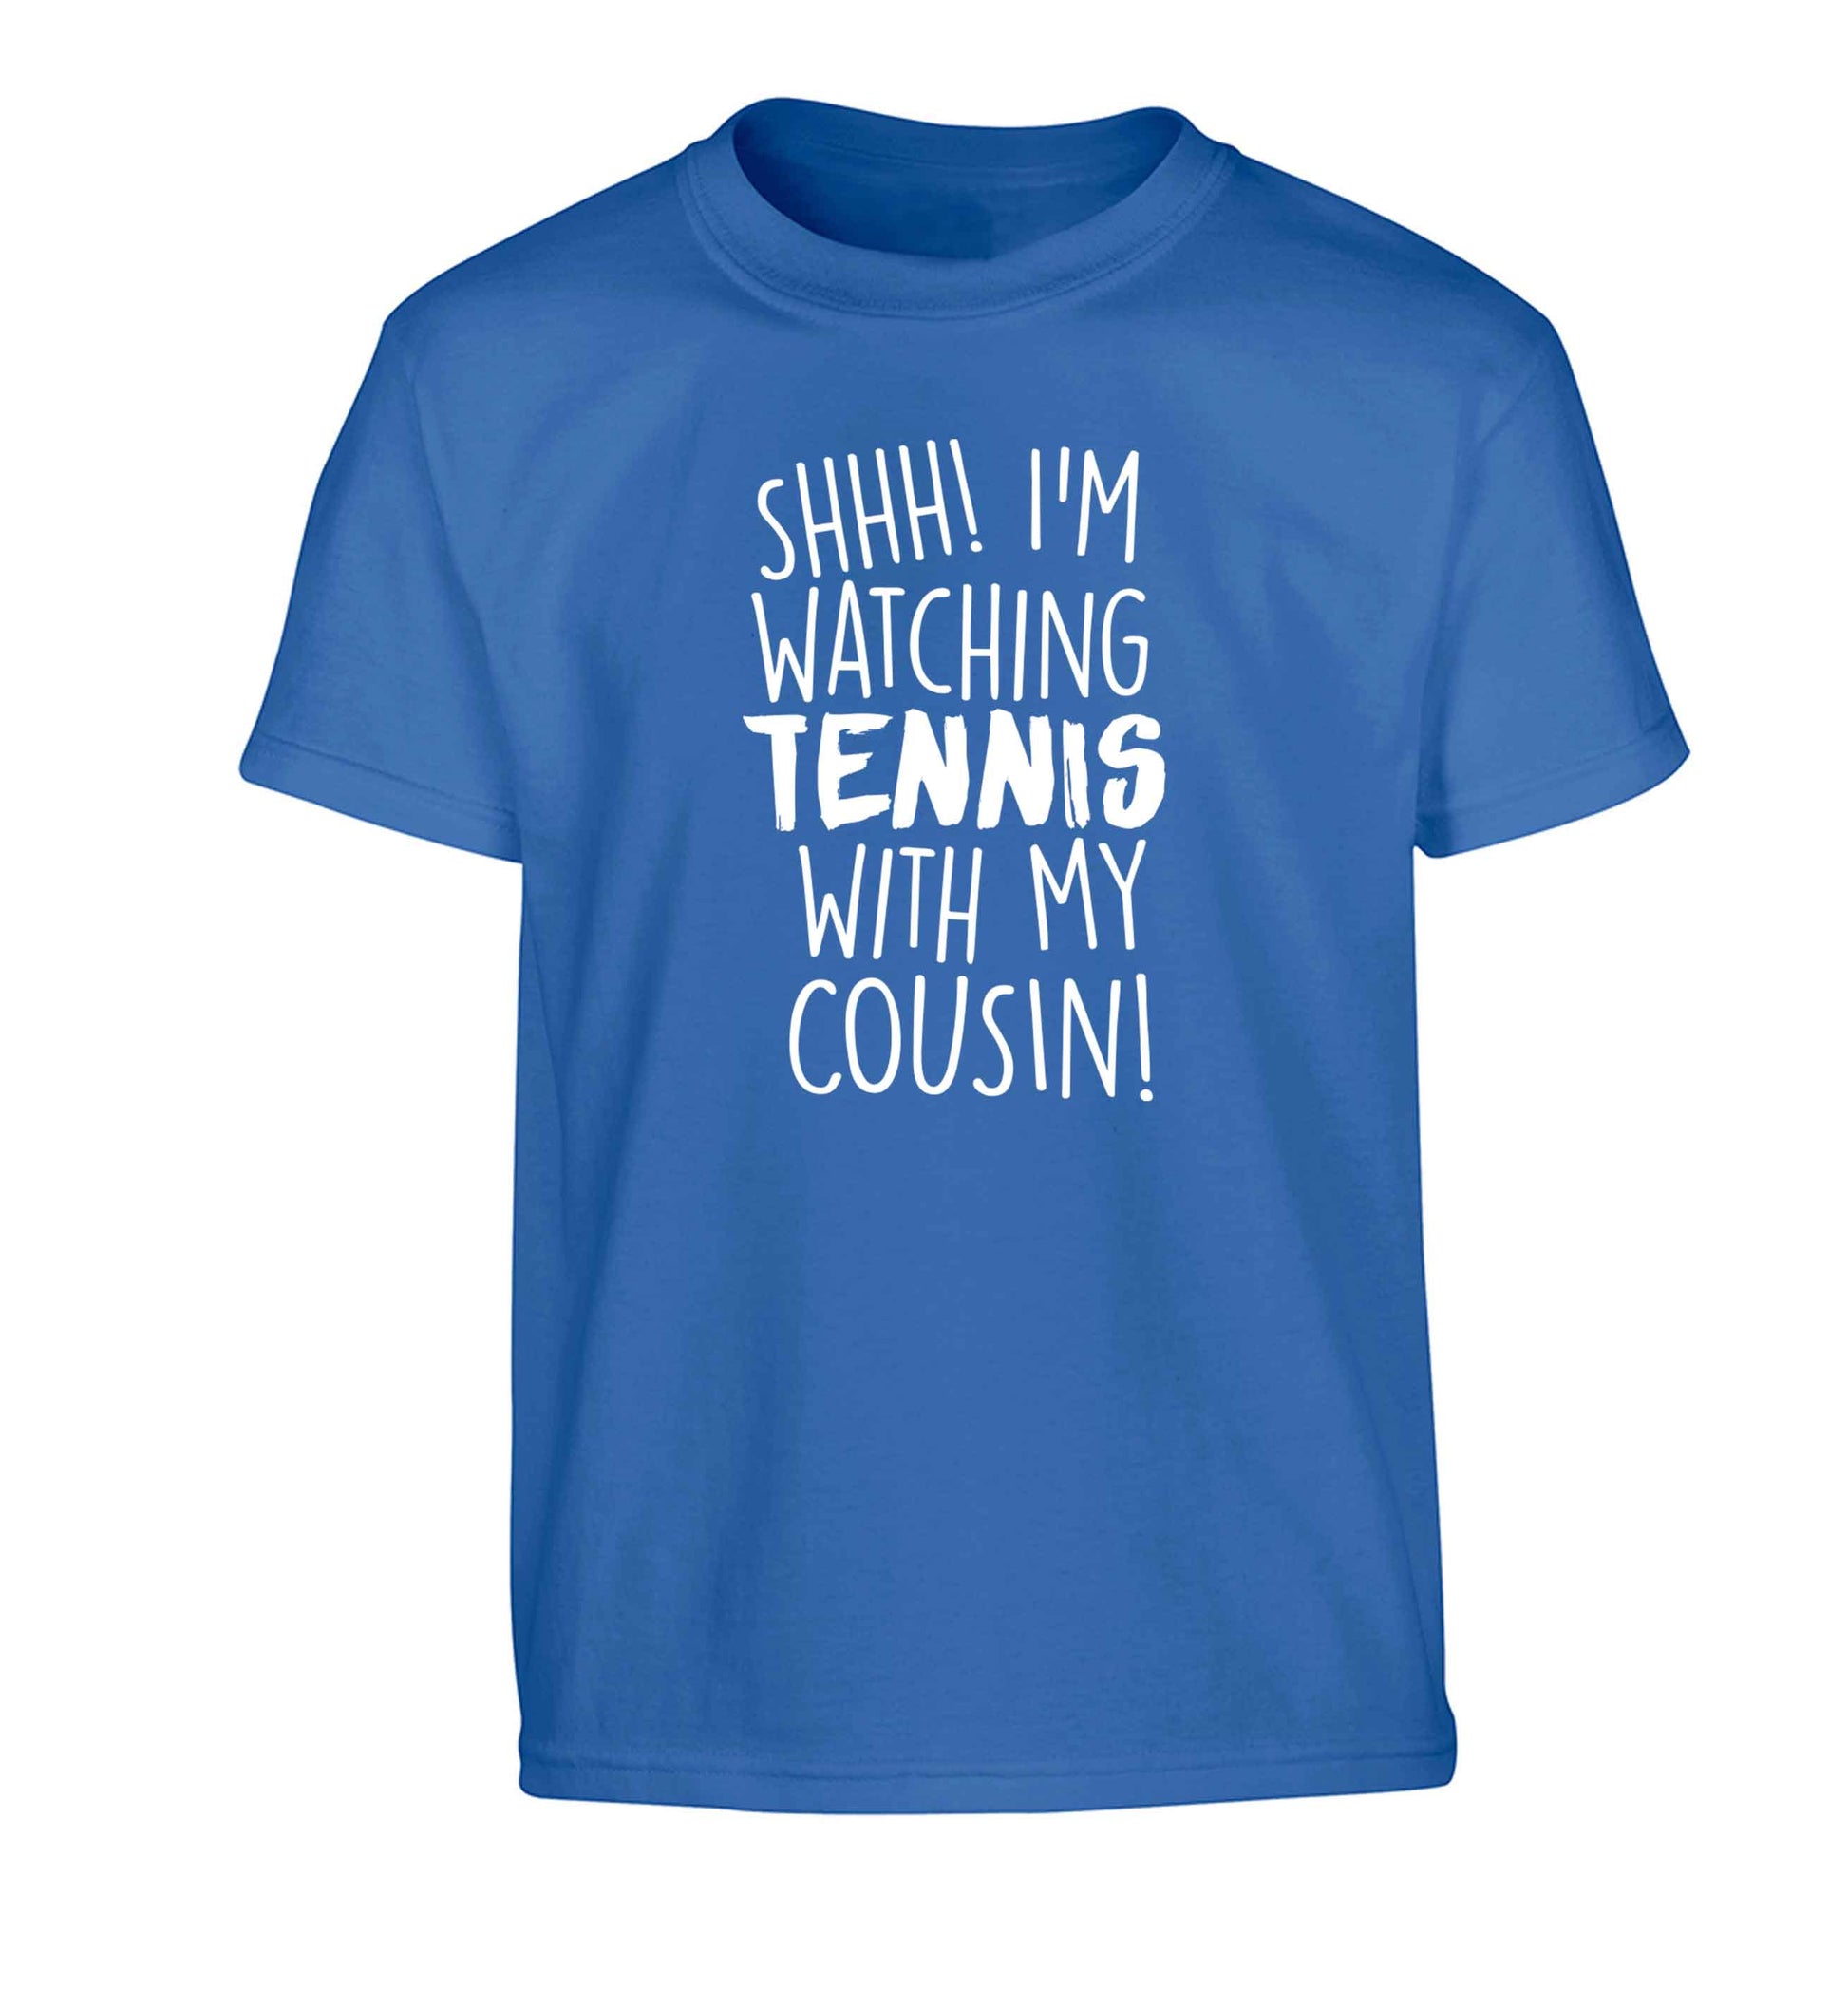 Shh! I'm watching tennis with my cousin! Children's blue Tshirt 12-13 Years